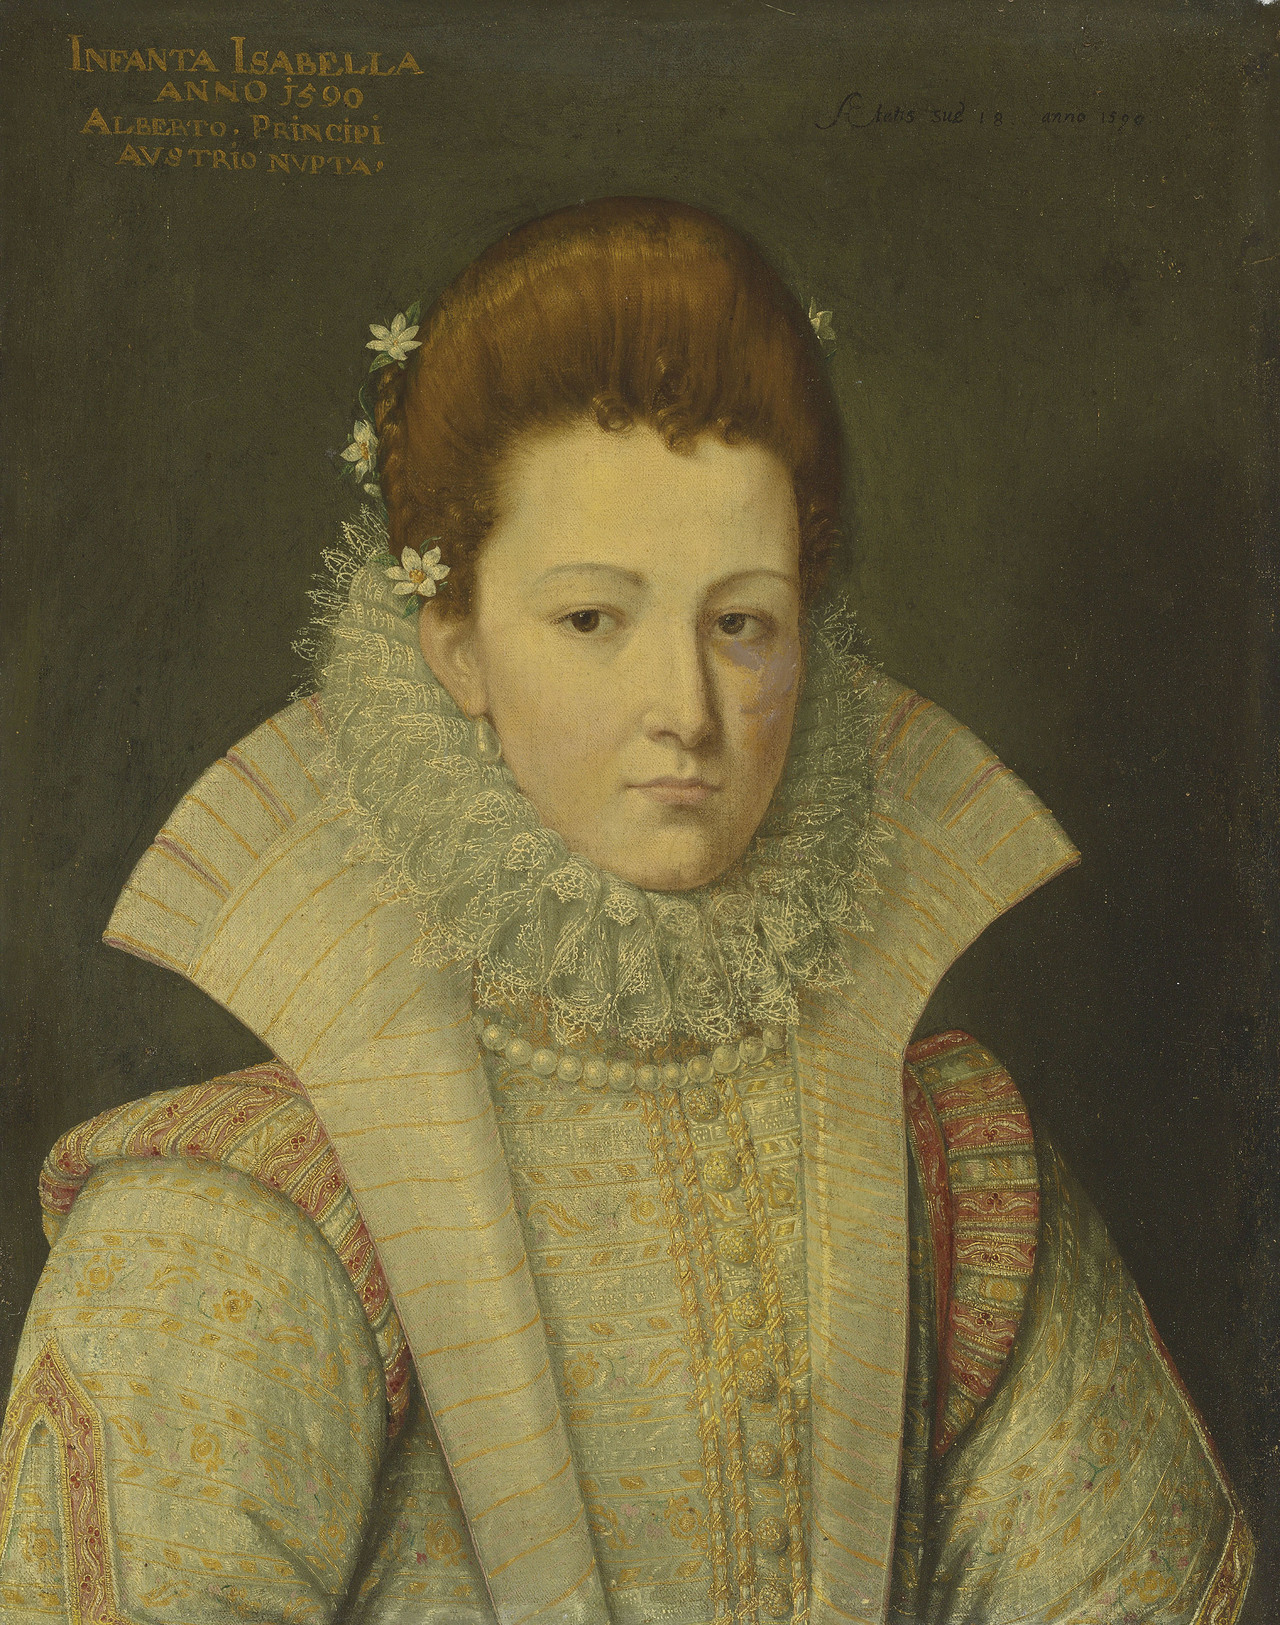 Italian School, â€˜Portrait of a lady in a gilt embroidered oyster gown and ruffâ€™, 1590s, oil on canvas, Italian, for sale est. 10,000-15,000 GBP in Christieâ€™s Old Masters Day sale, July 2019
The inscription on the upper left reads: 'INFANTA...